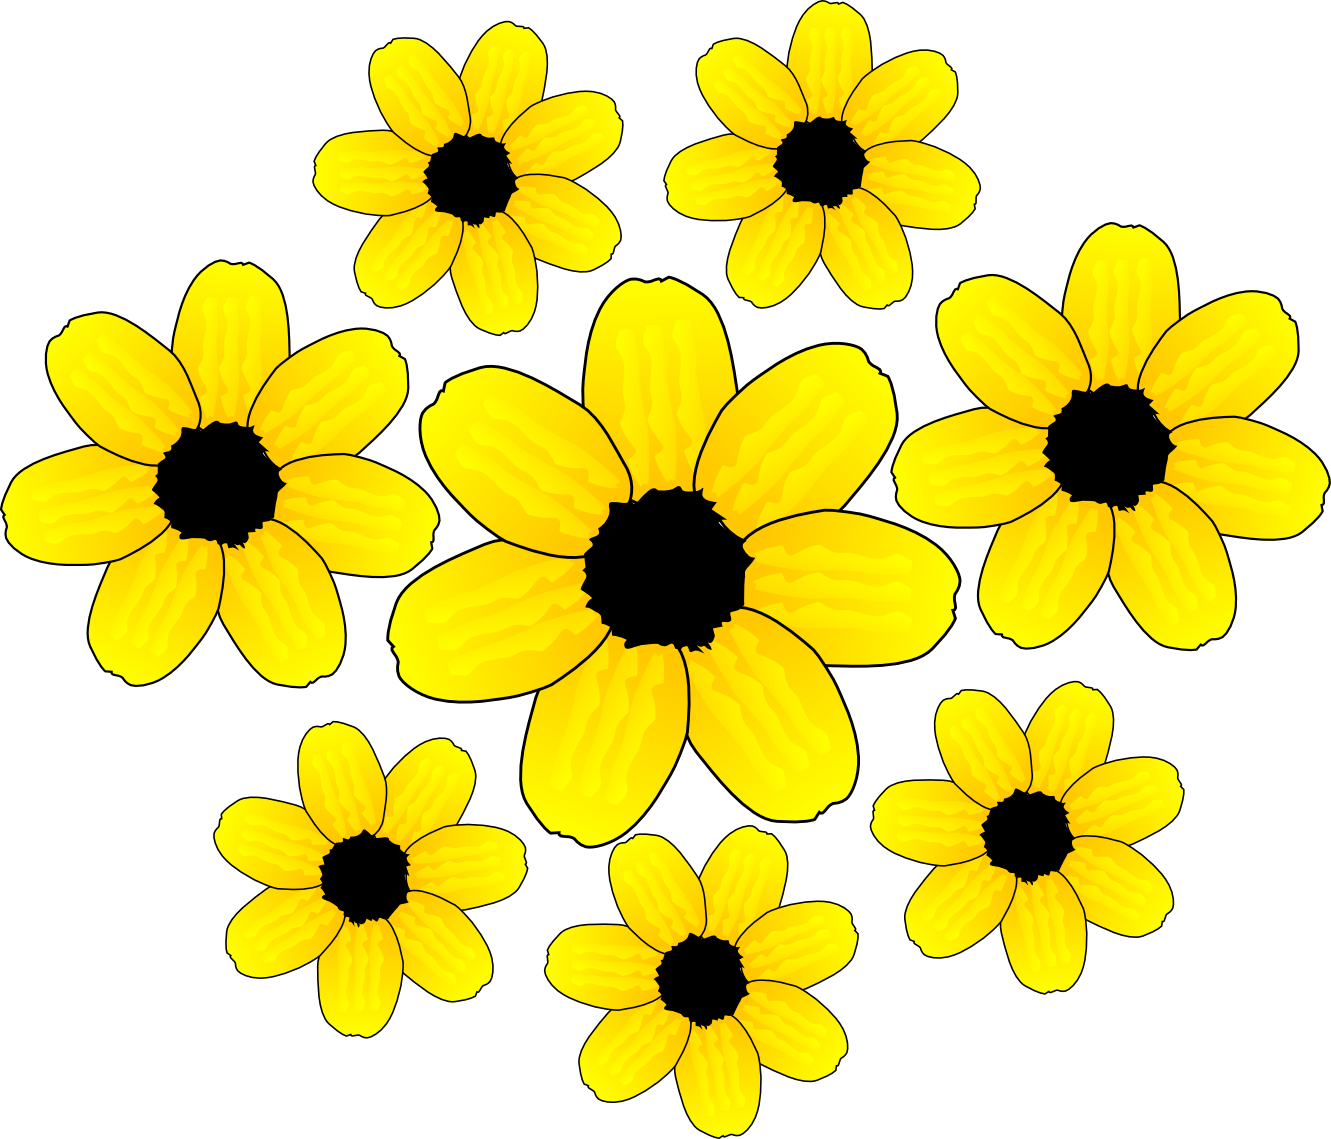 Yellow Flower clipart #4, Download drawings